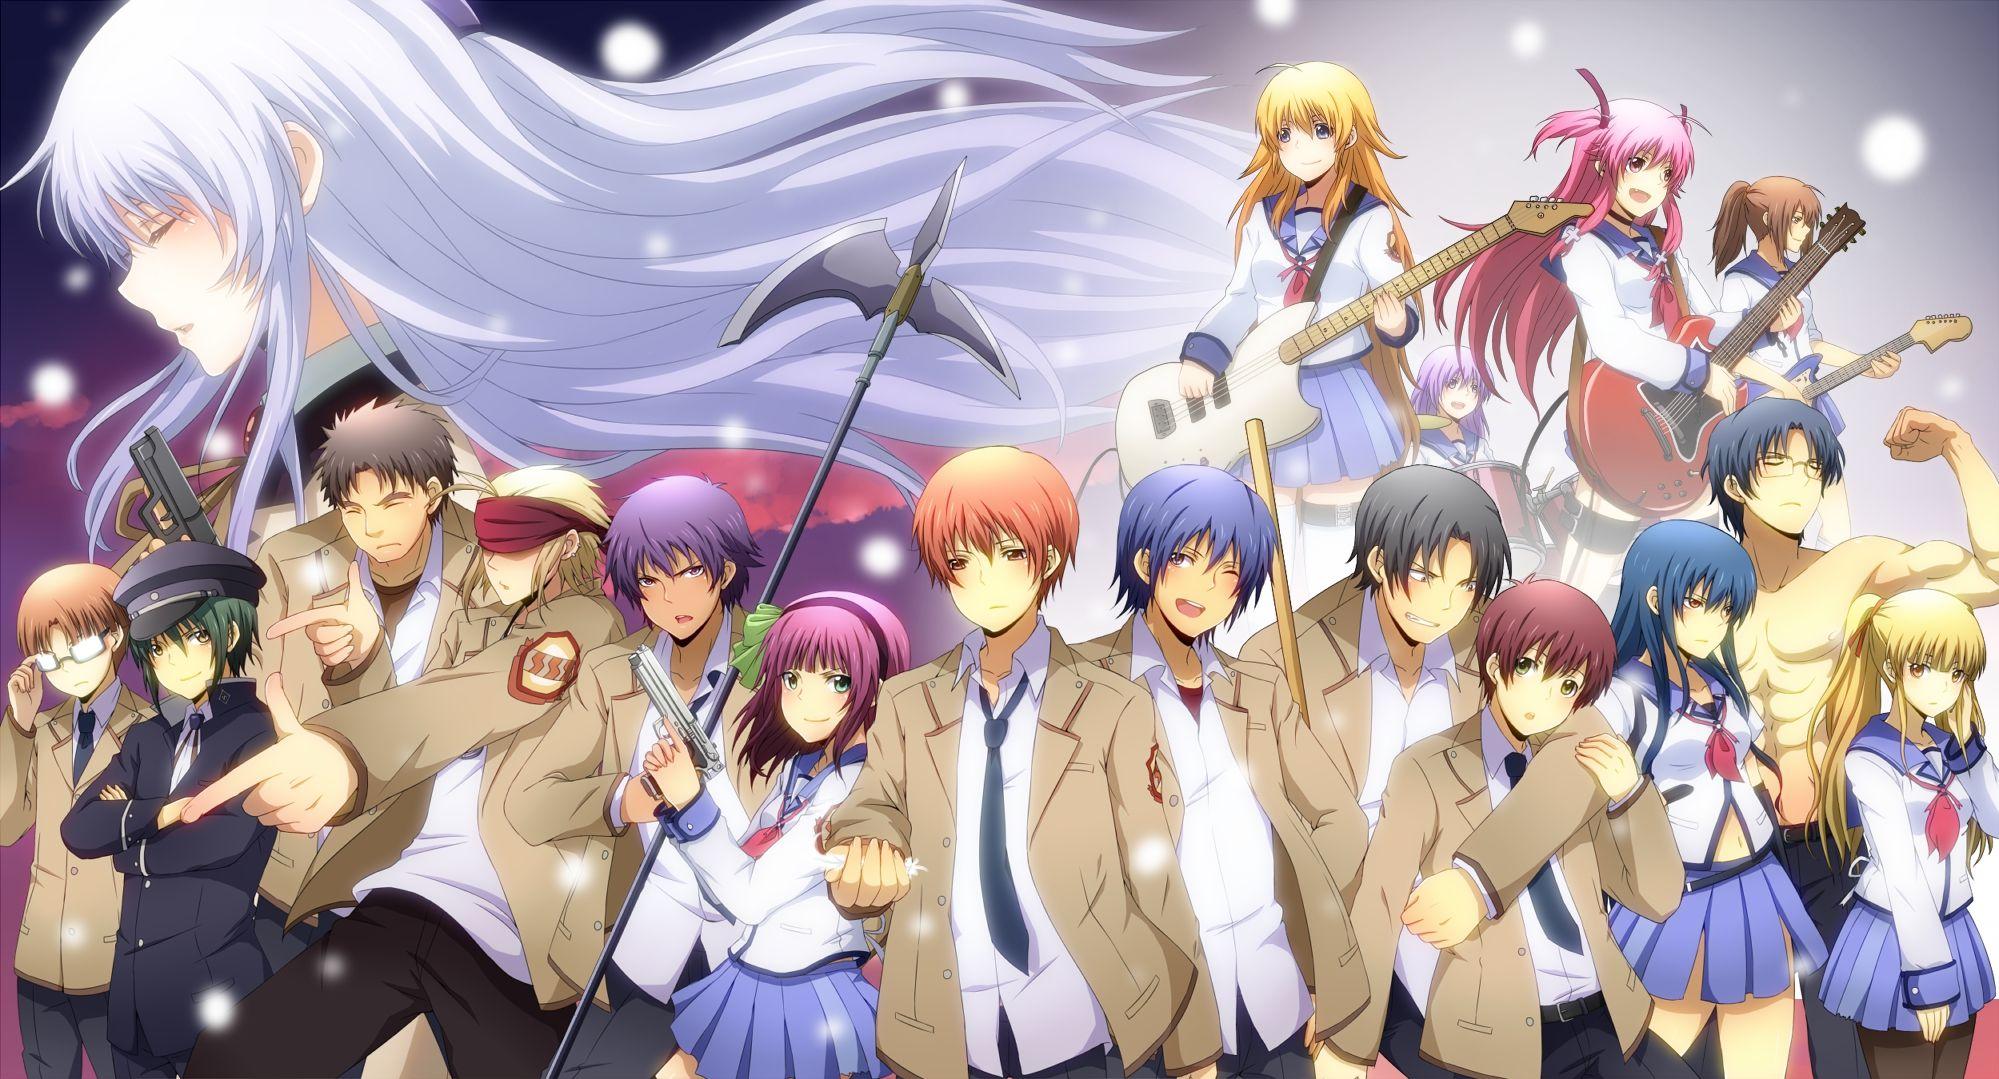 Anime Angel Beats Wallpapers Top Free Anime Angel Beats Backgrounds Wallpaperaccess